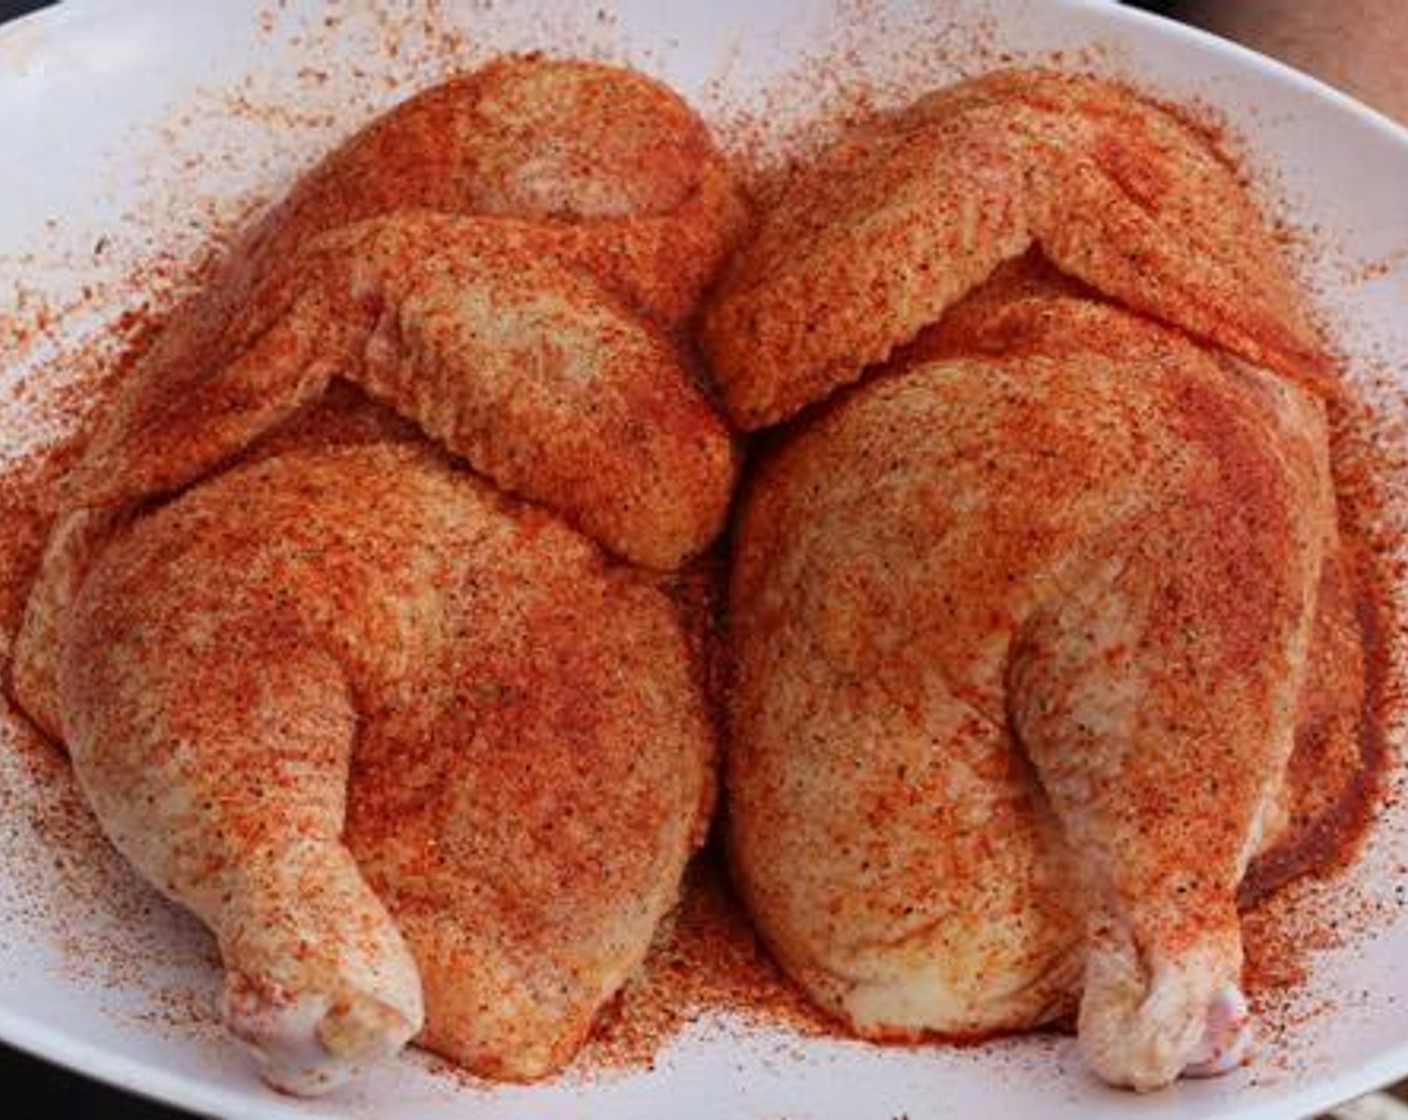 step 3 Season both sides of each chicken half with All-Purpose Spice Rub (1/4 cup) followed by a light coat of Barbecue Rub (1/4 cup).